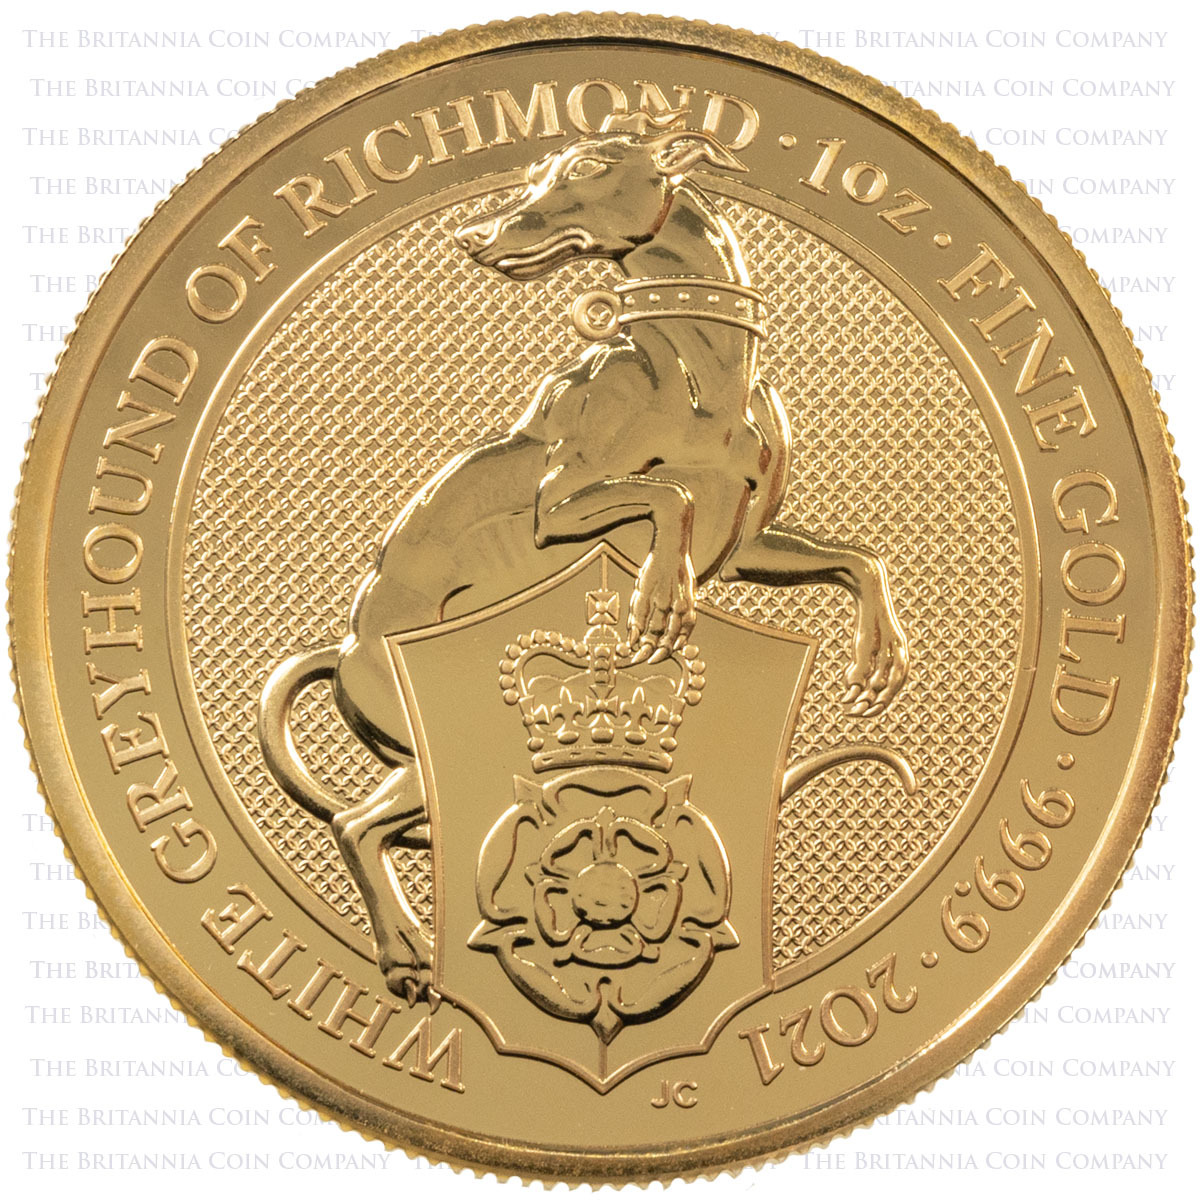 2021 Queen's Beasts White Greyhound Of Richmond One Ounce Gold Bullion Coin Reverse